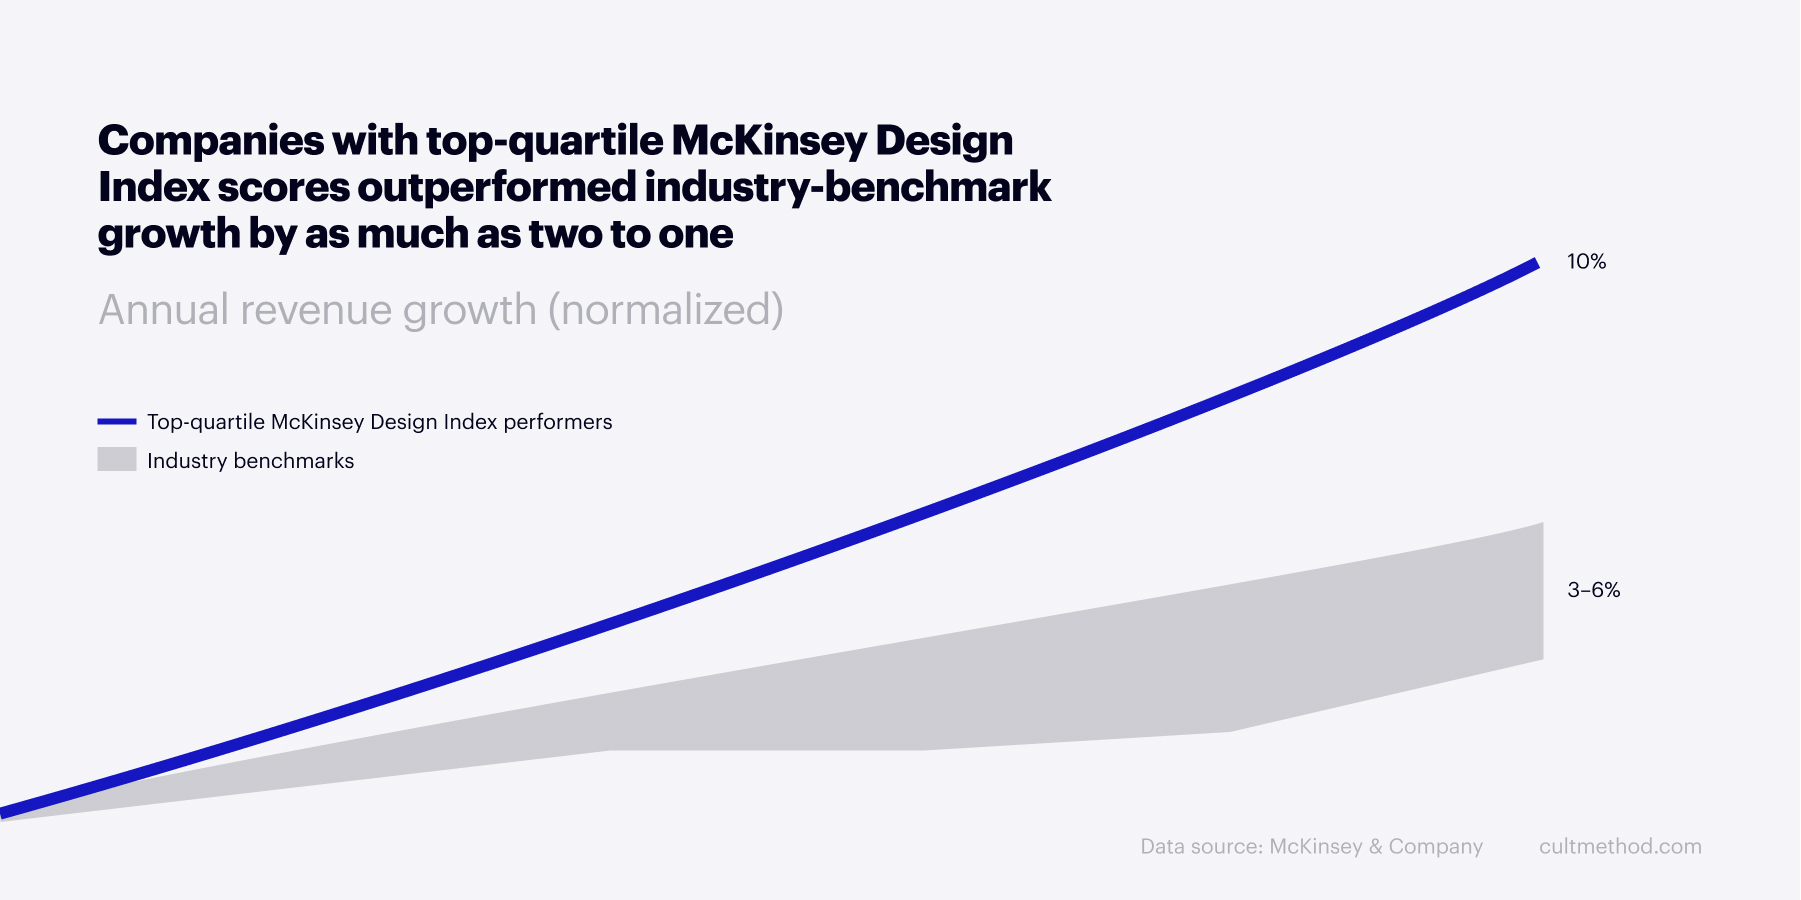 Source: McKinsey & Company, The business value of design